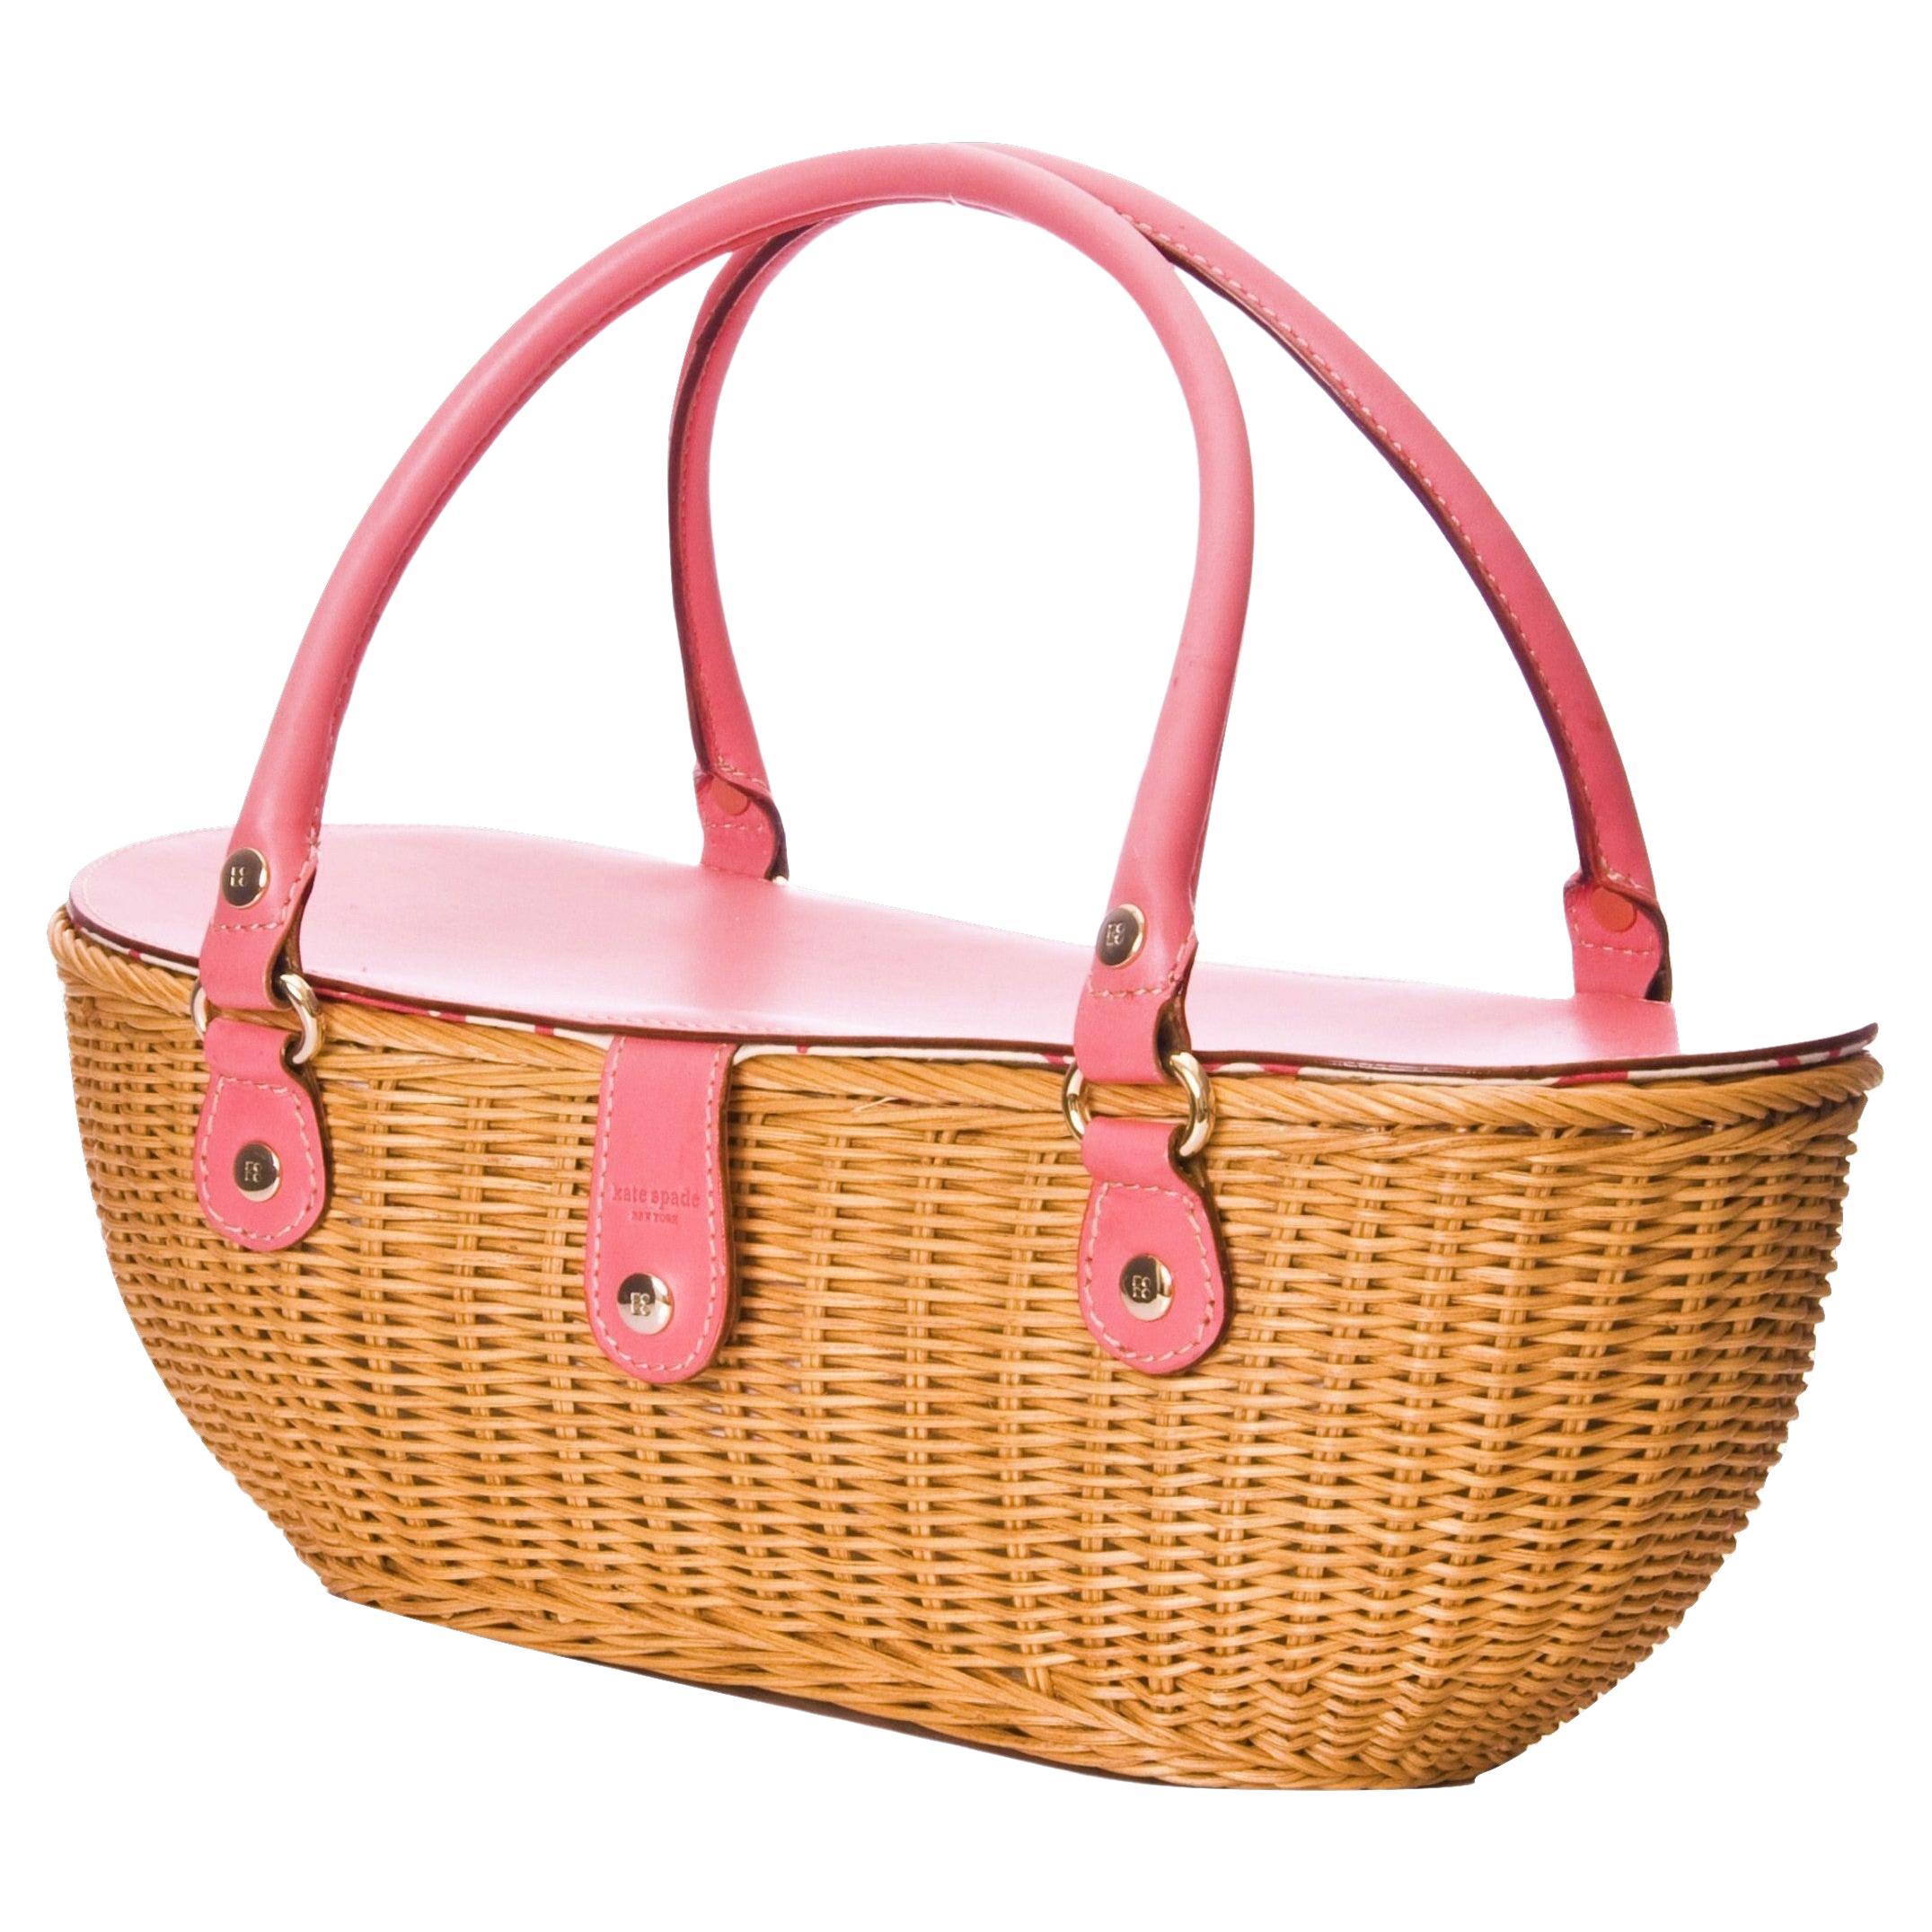 Kate Spade Wicker Bag
Rare From Her Spring 2005 Collection
DESIGNED BY KATE SPADE
This is the last collection before she sold her brand to Neiman Marcus
Impossible to Find Brand New
* Beautiful Lacquered Woven Wicker
* Gold Hardware
* One Interior